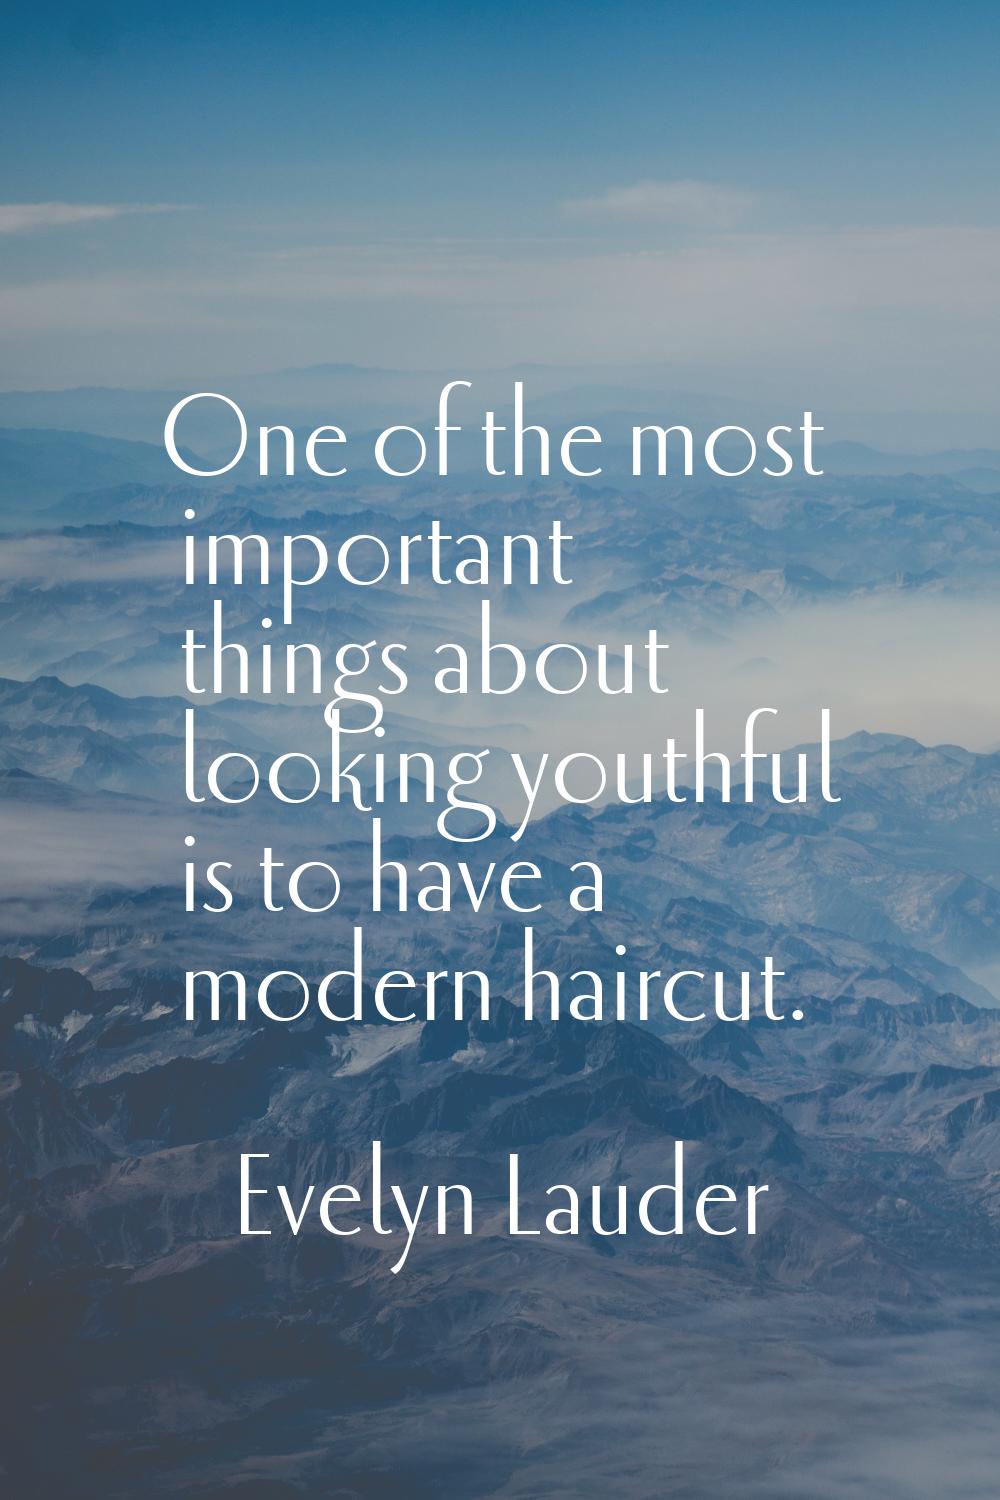 One of the most important things about looking youthful is to have a modern haircut.